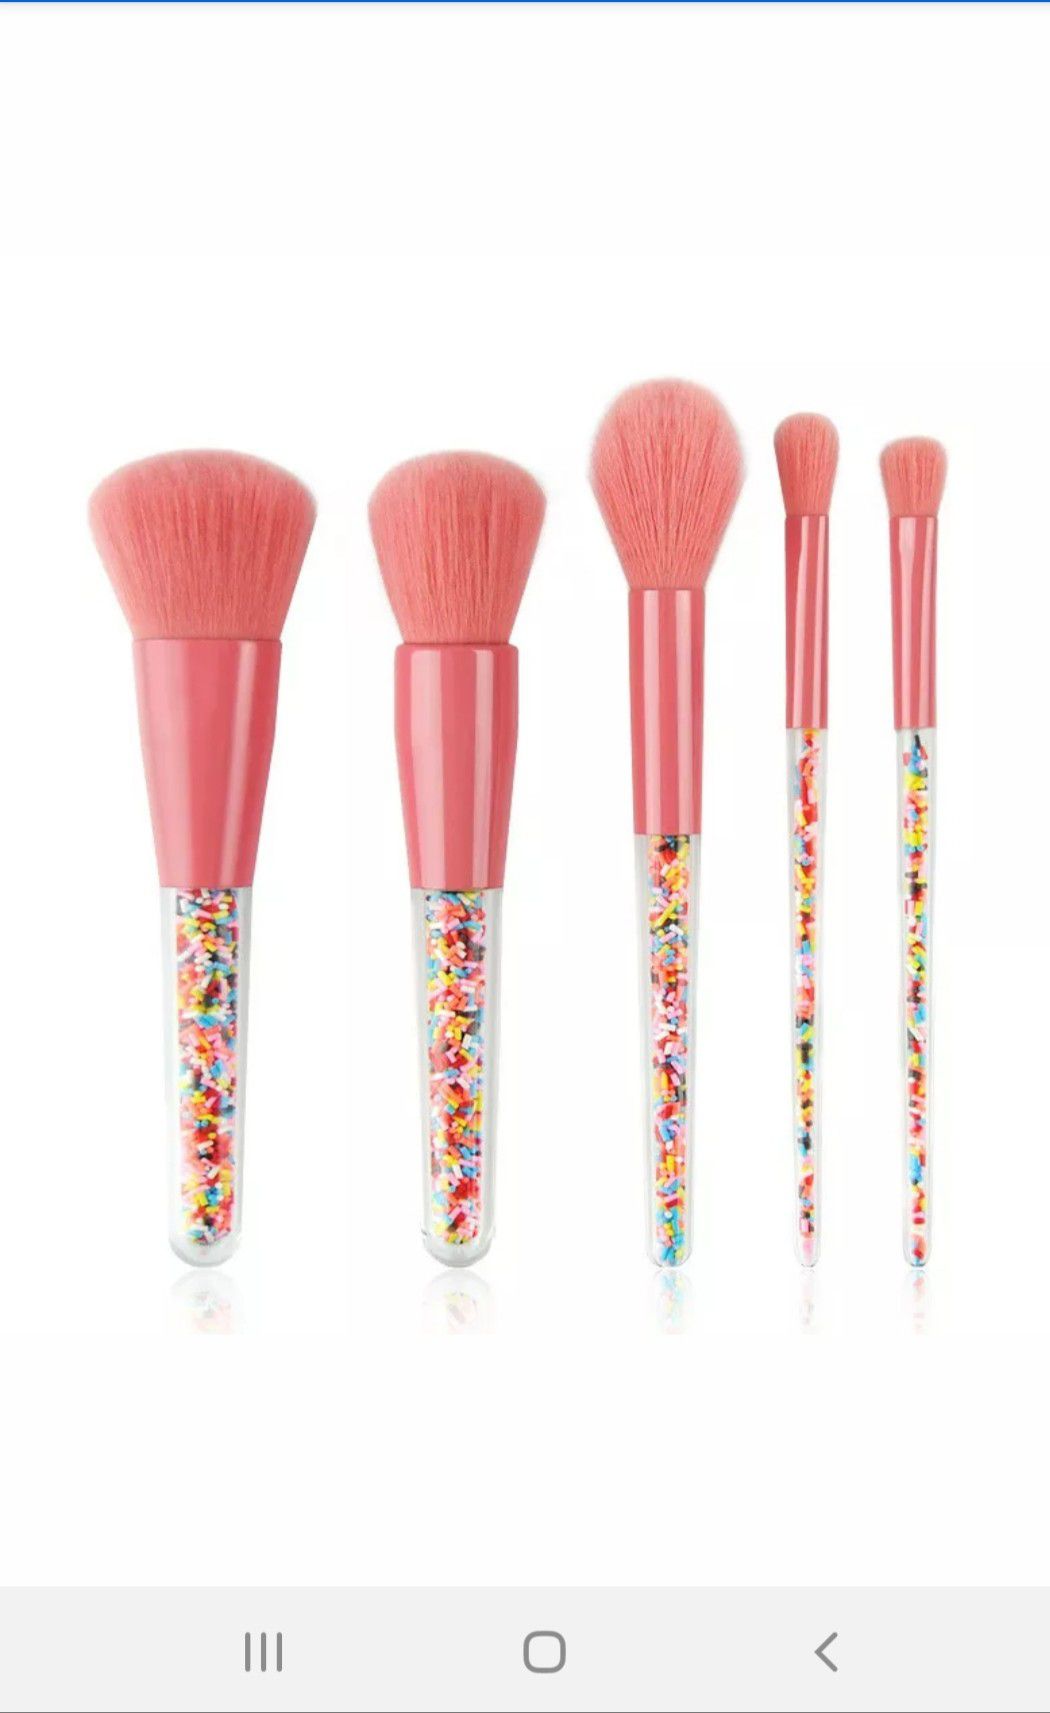 Makeup brushes candy sprinkles wand